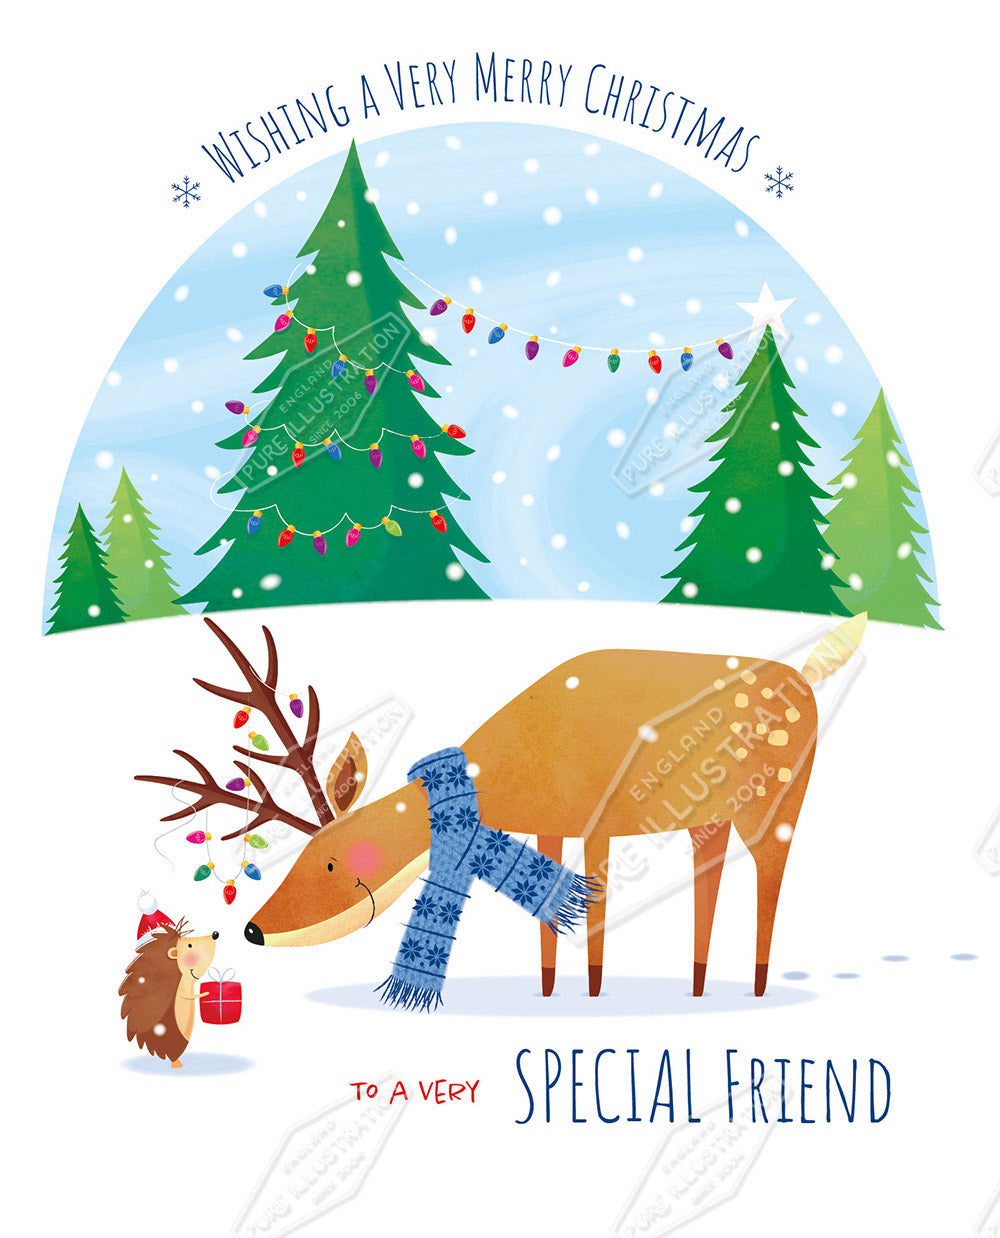 00035558SPI - Christmas Gift Bag & Greeting Card Design - Sarah Pitt is represented by Pure Art Licensing Agency - Christmas Greeting Card